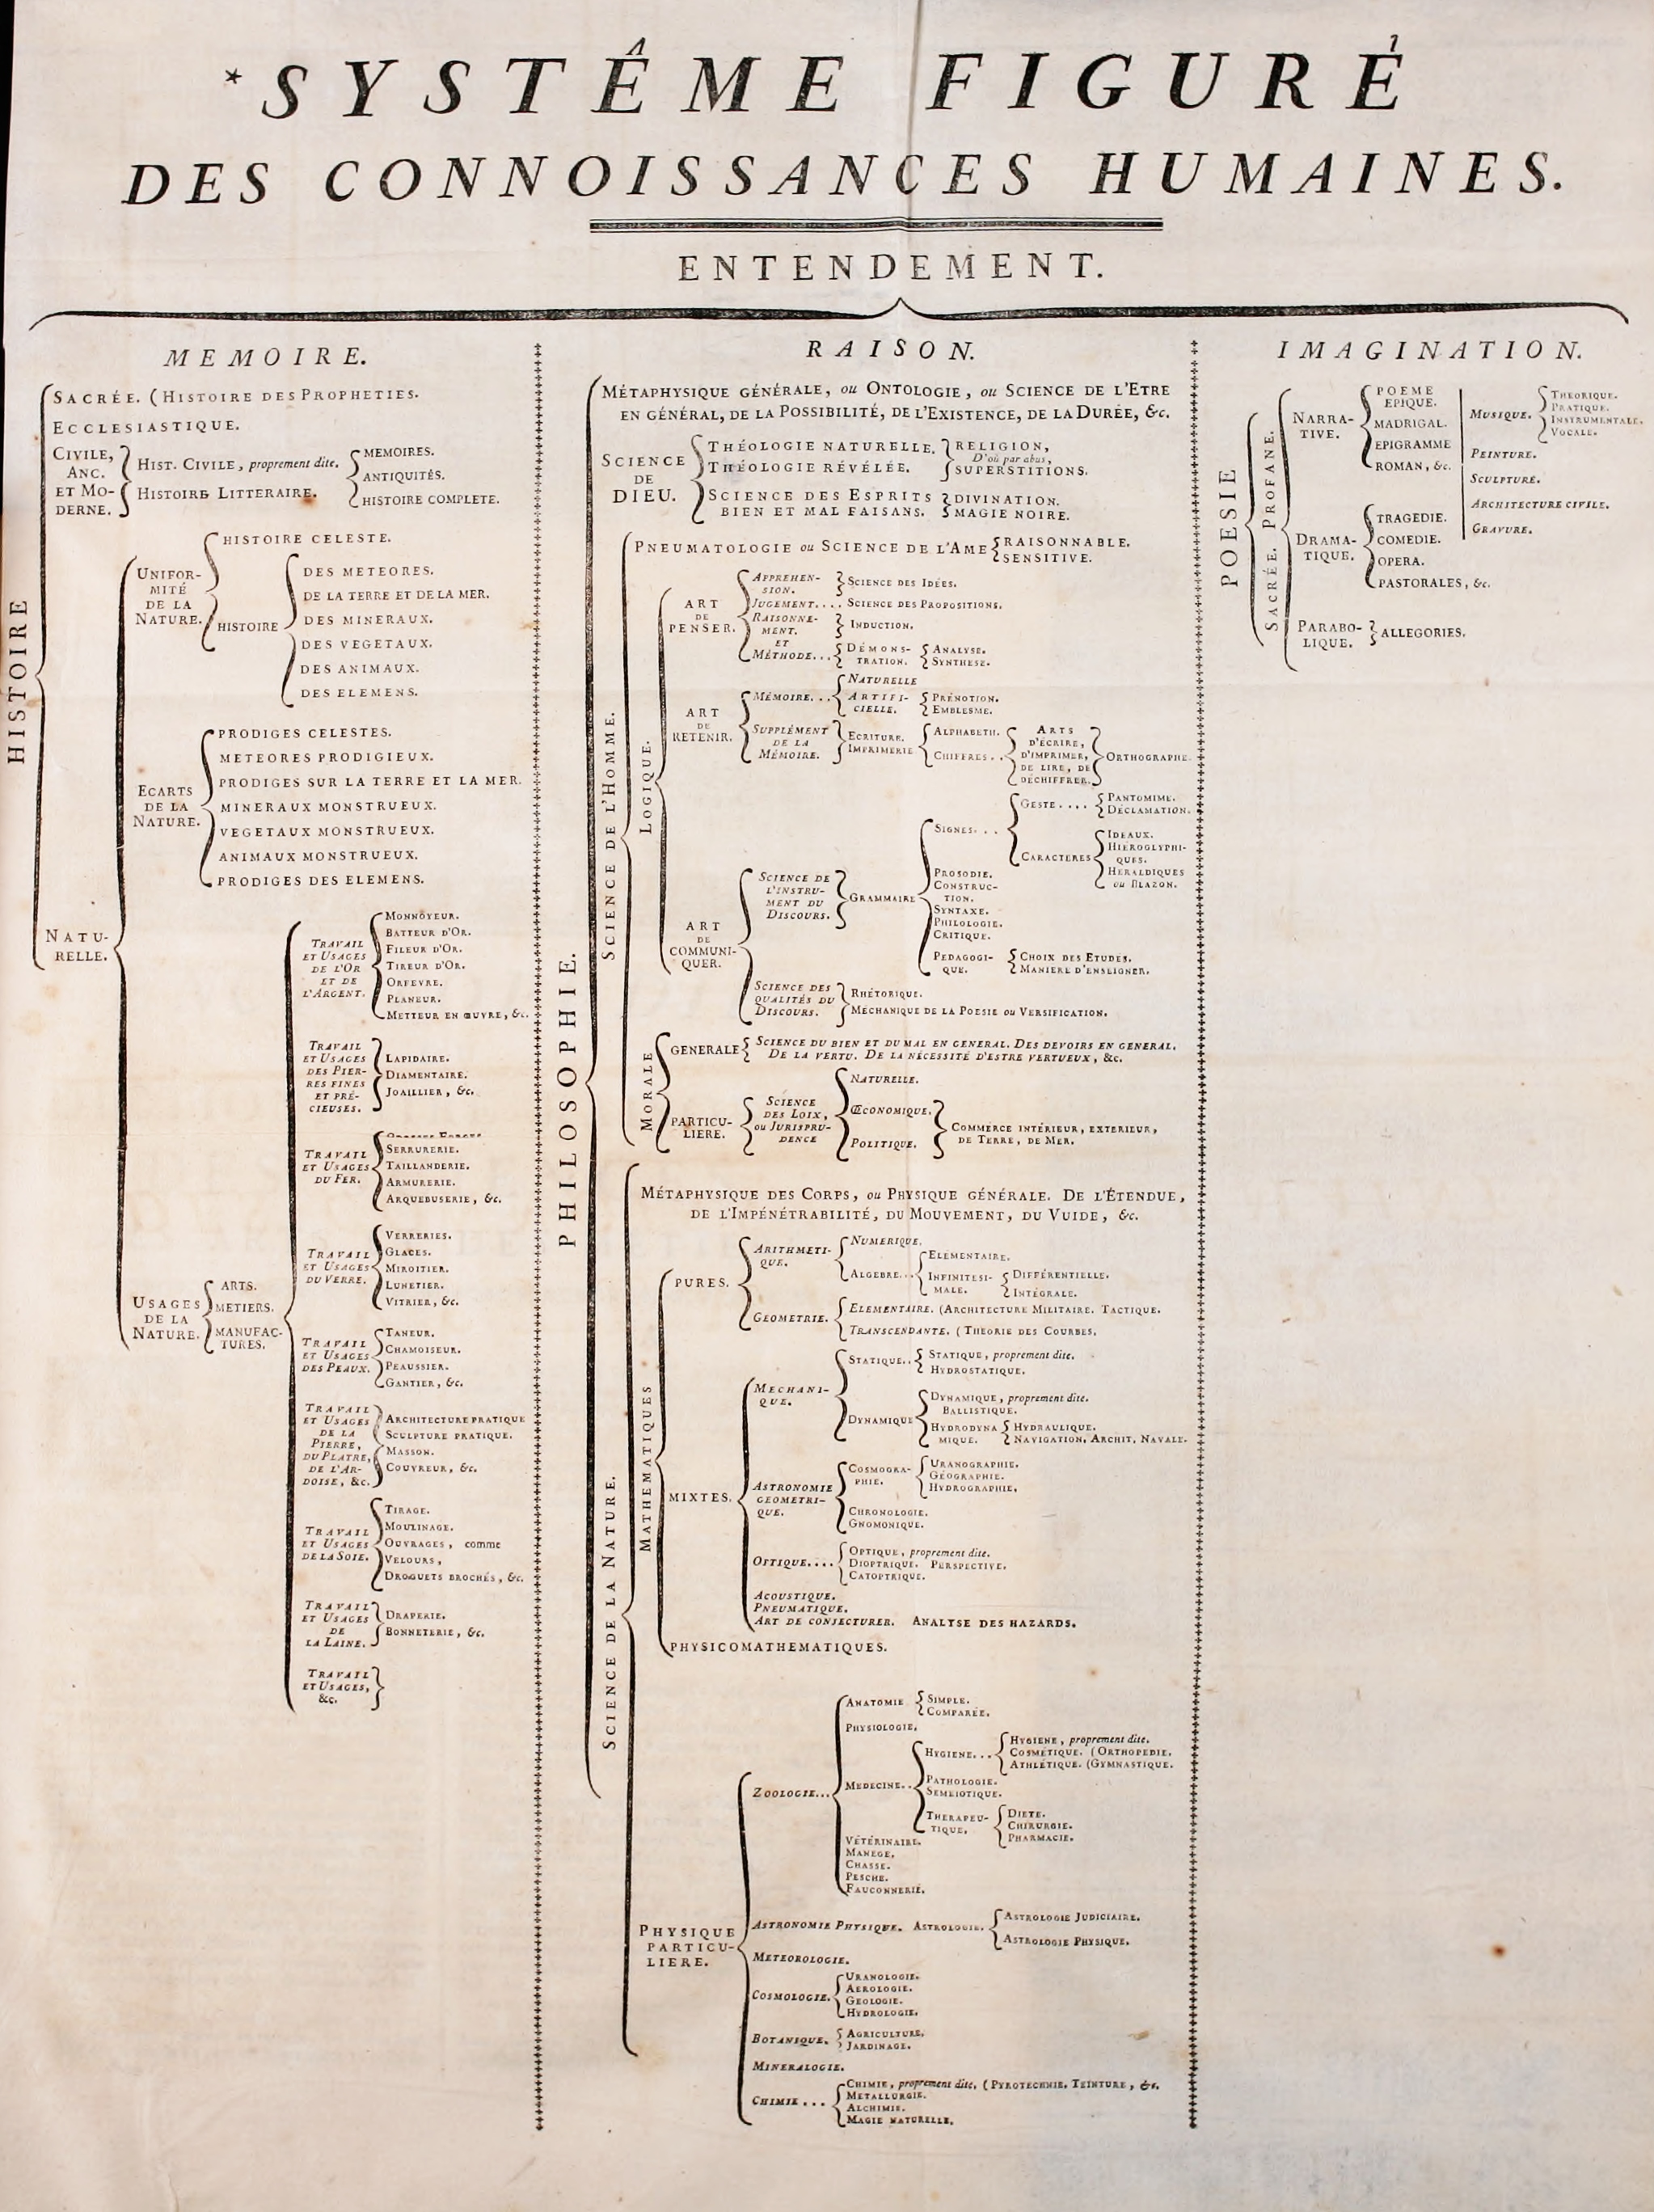 Classification of the structure of knowledge, produced for the Encyclopédie by d'Alembert and Diderot, 1752.